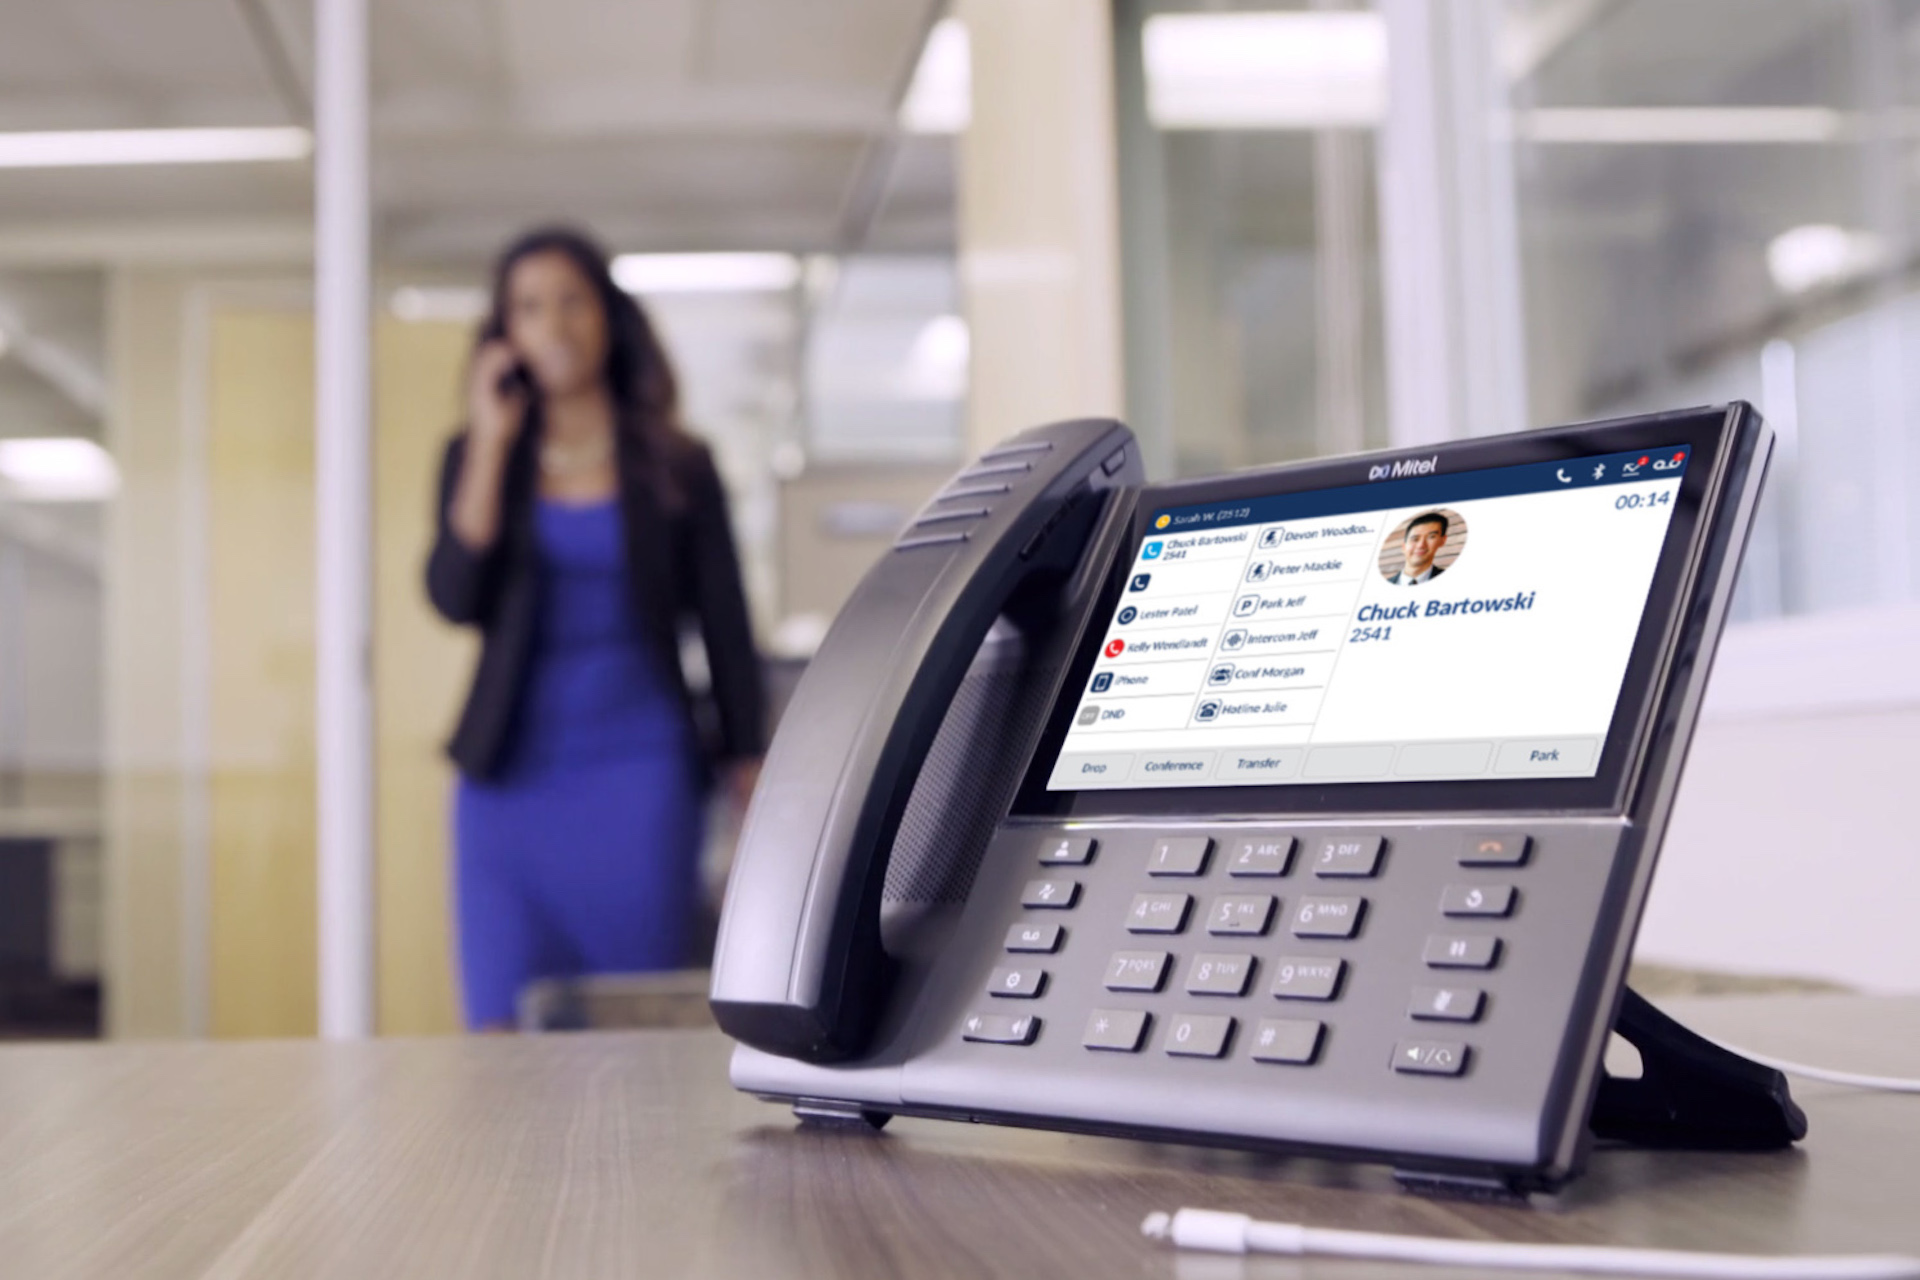 Best Handsets For Avaya Phone systems Harlow